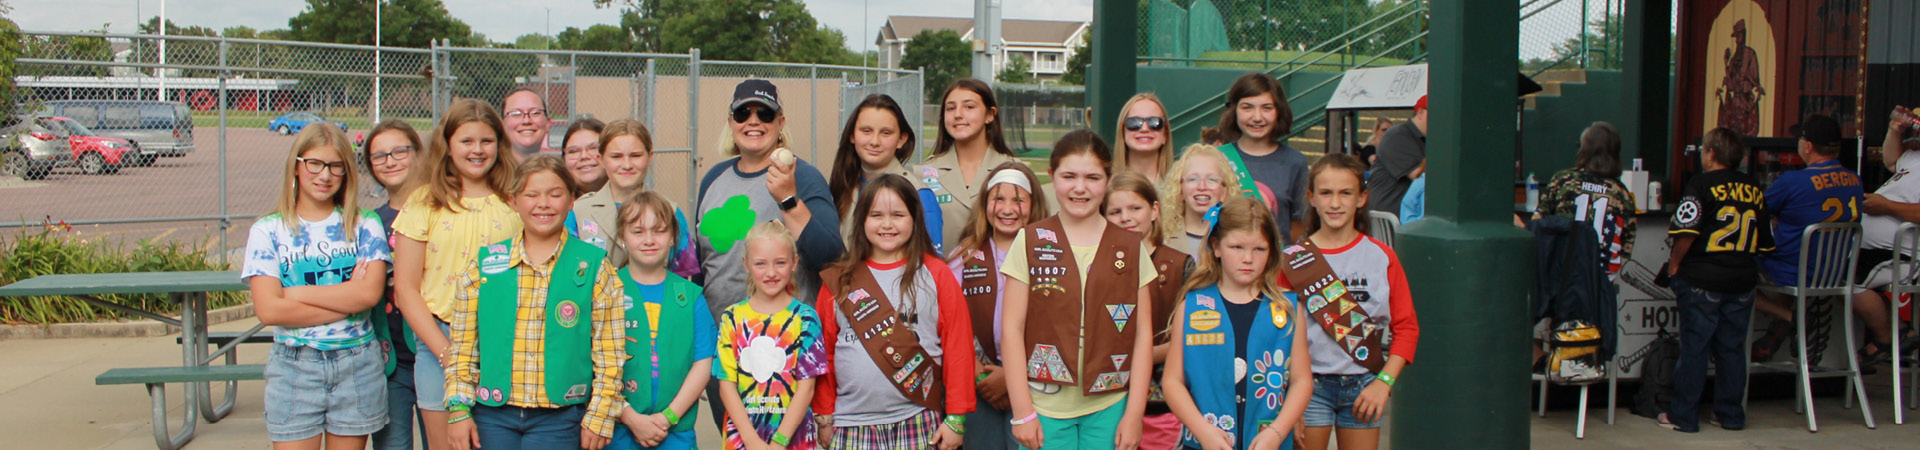  girls scouts at birdcage 